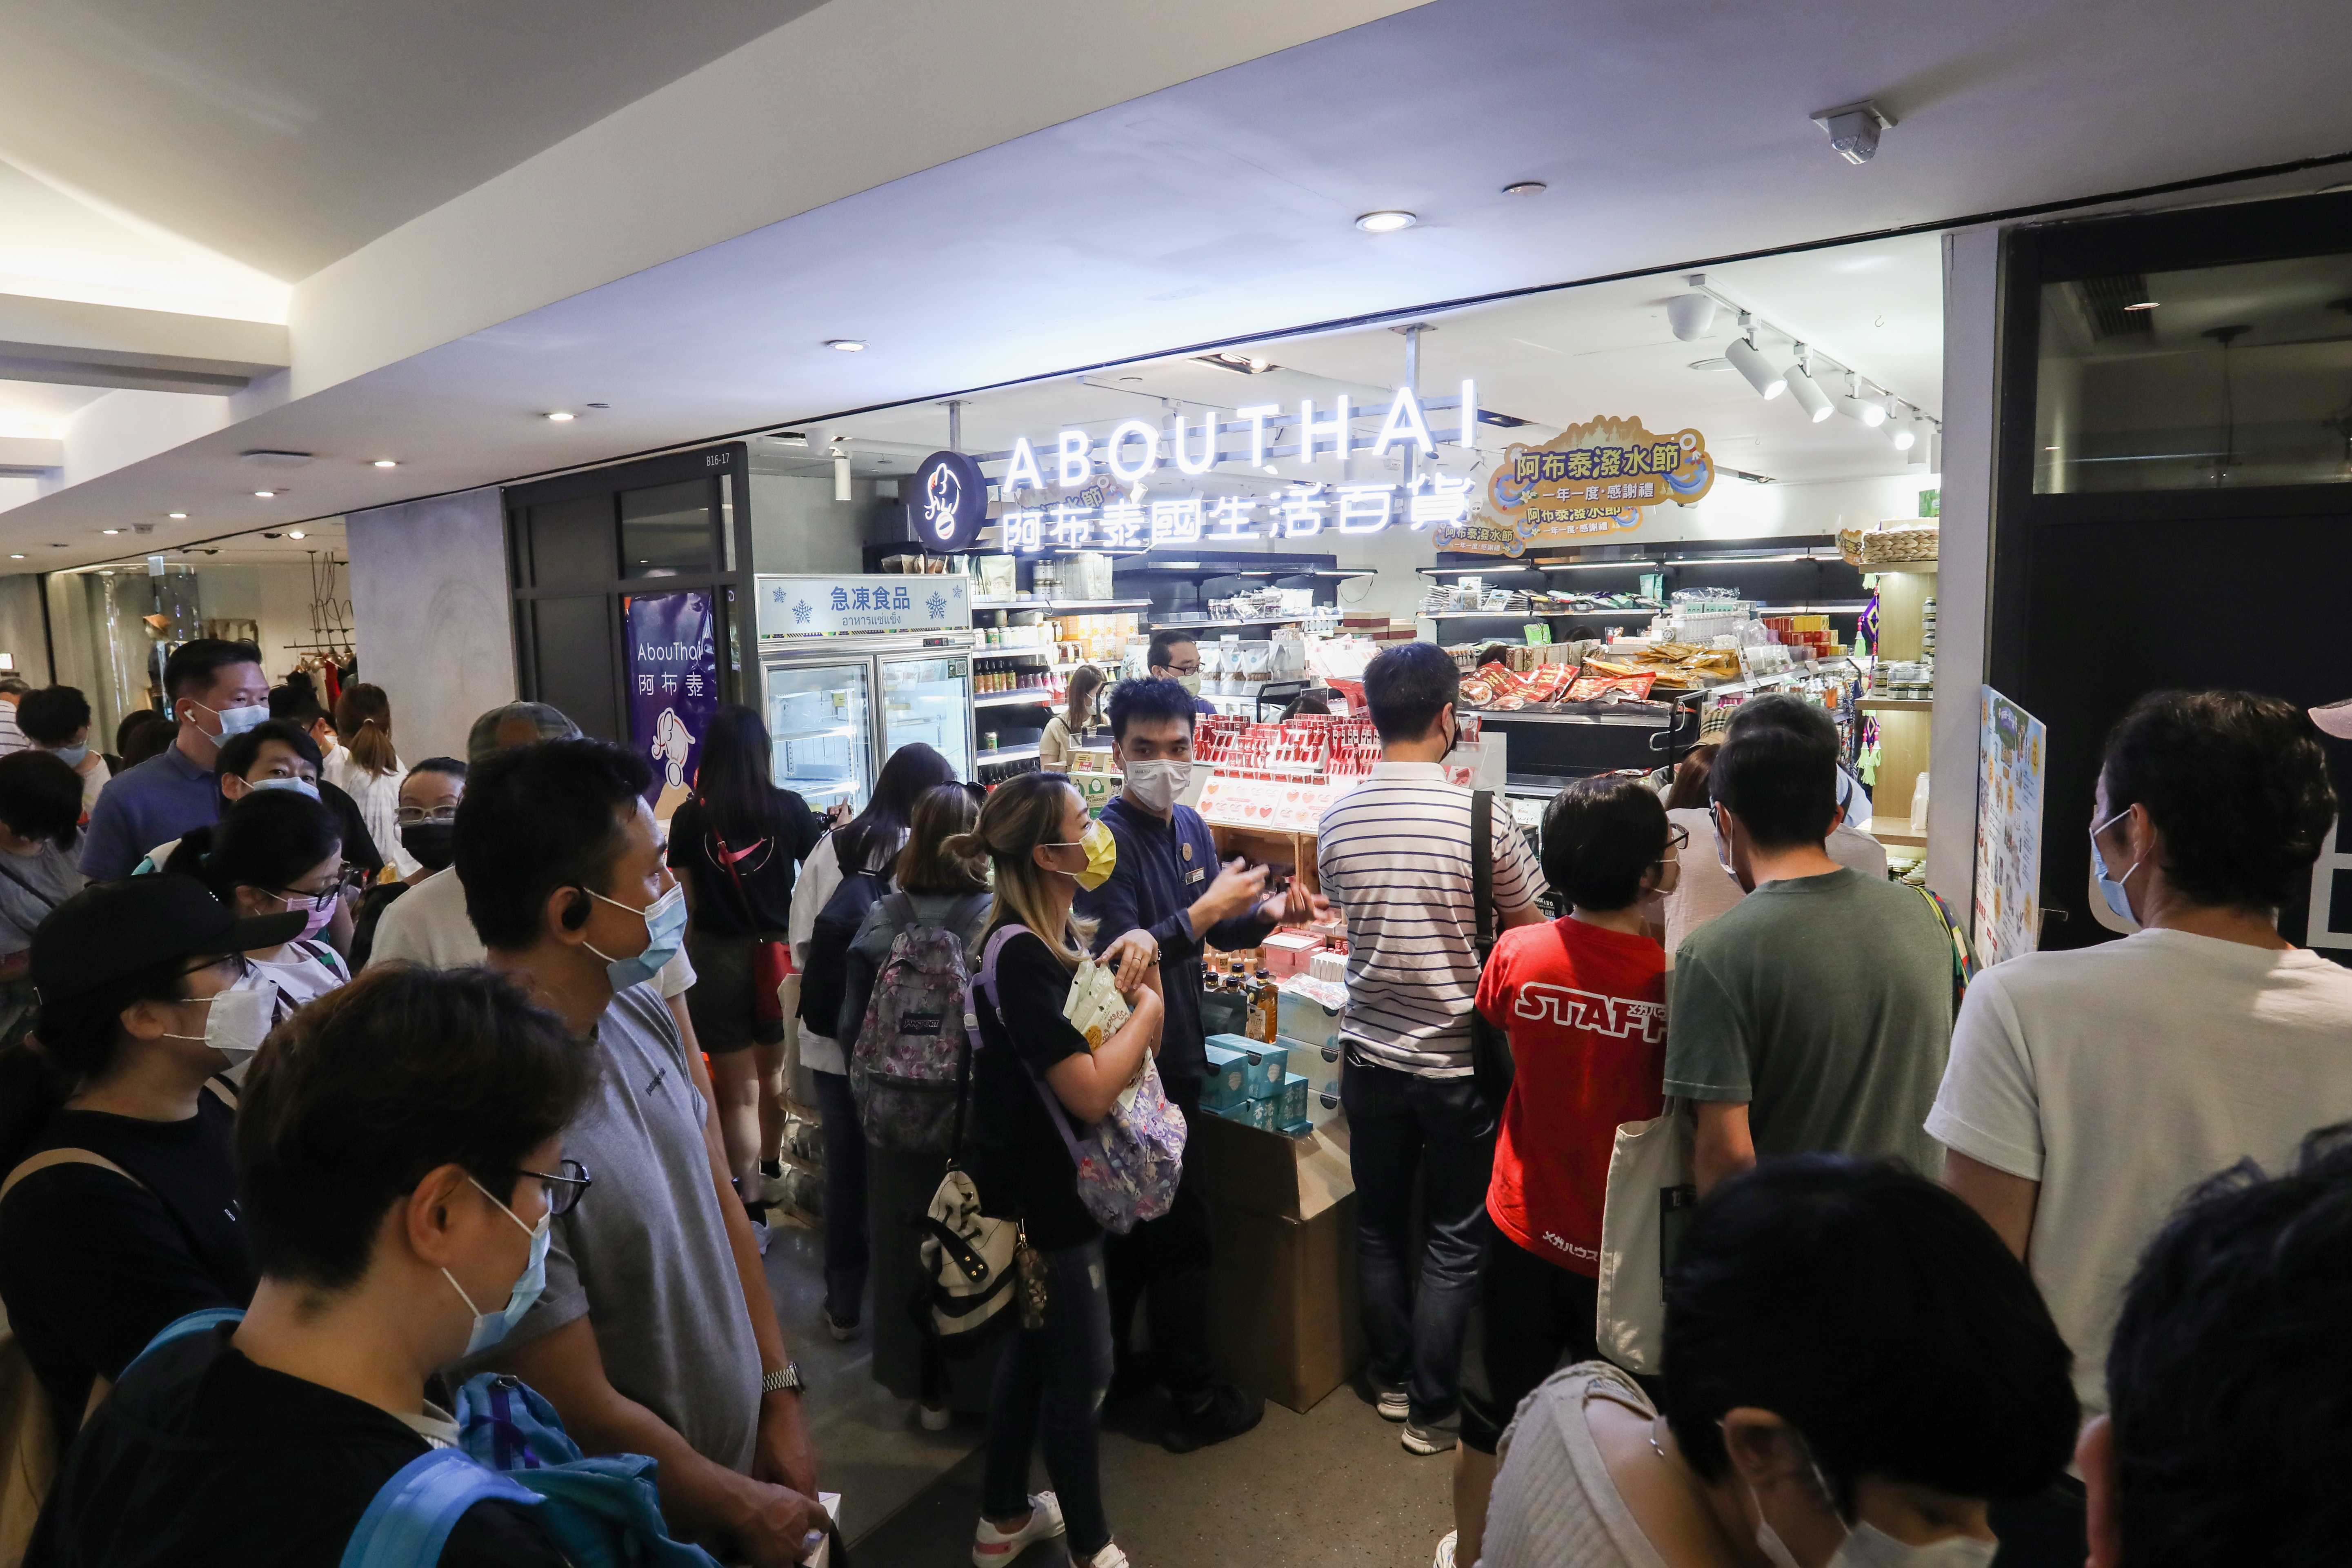 Shoppers flocked to support AbouThai after it was raided. Photo: SCMP/Jonathan Wong